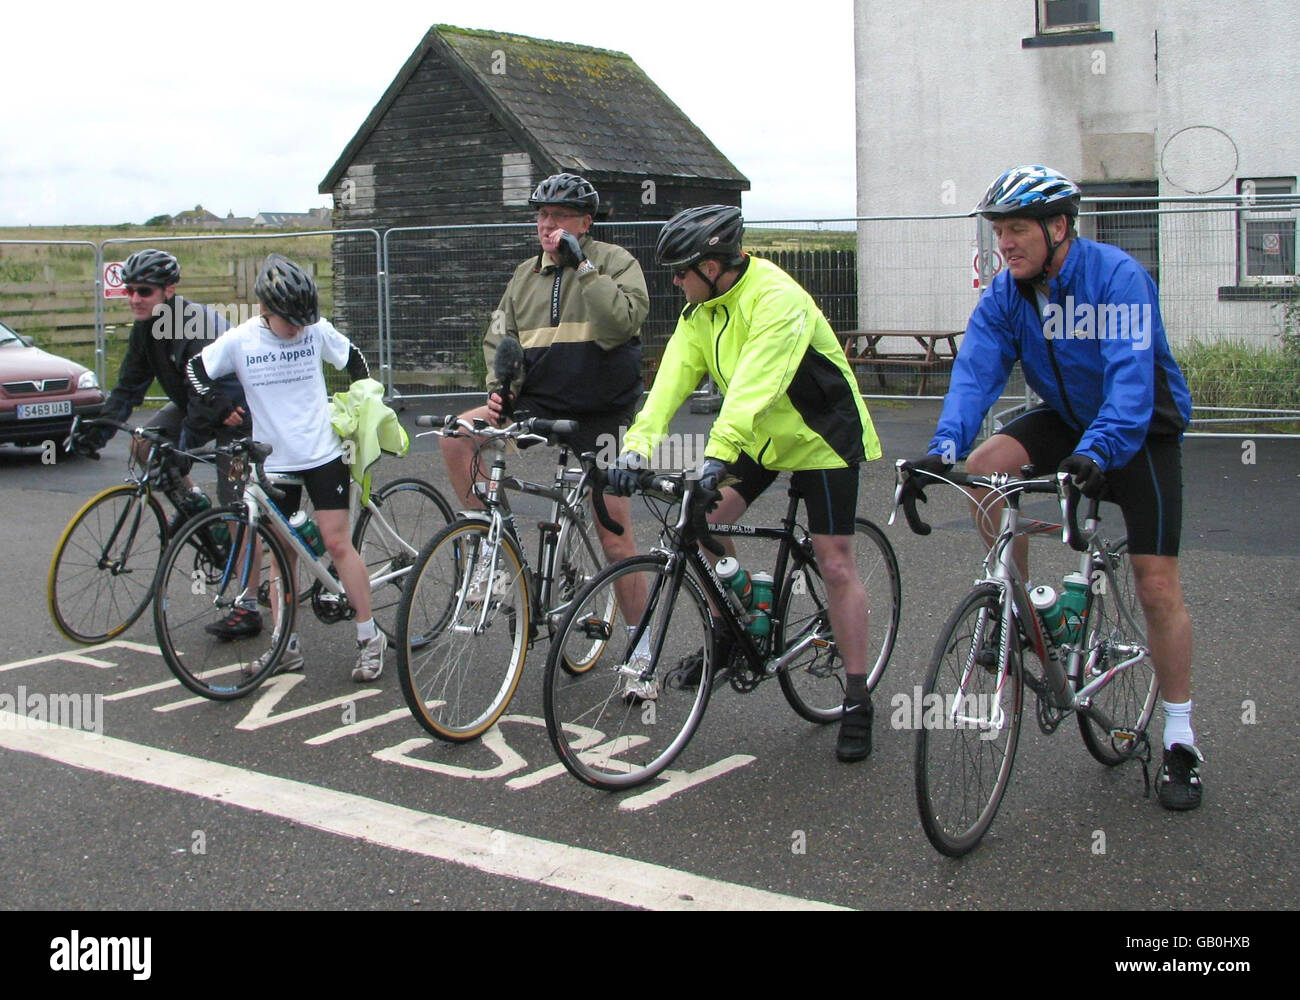 Mike Tomlinson (second right) and daughter Rebecca (second left), the husband and daughter of charity campaigner Jane Tomlinson, at John O'Groats in the north of Scotland as they prepare to cycle the length of Britain to Land's End. Stock Photo